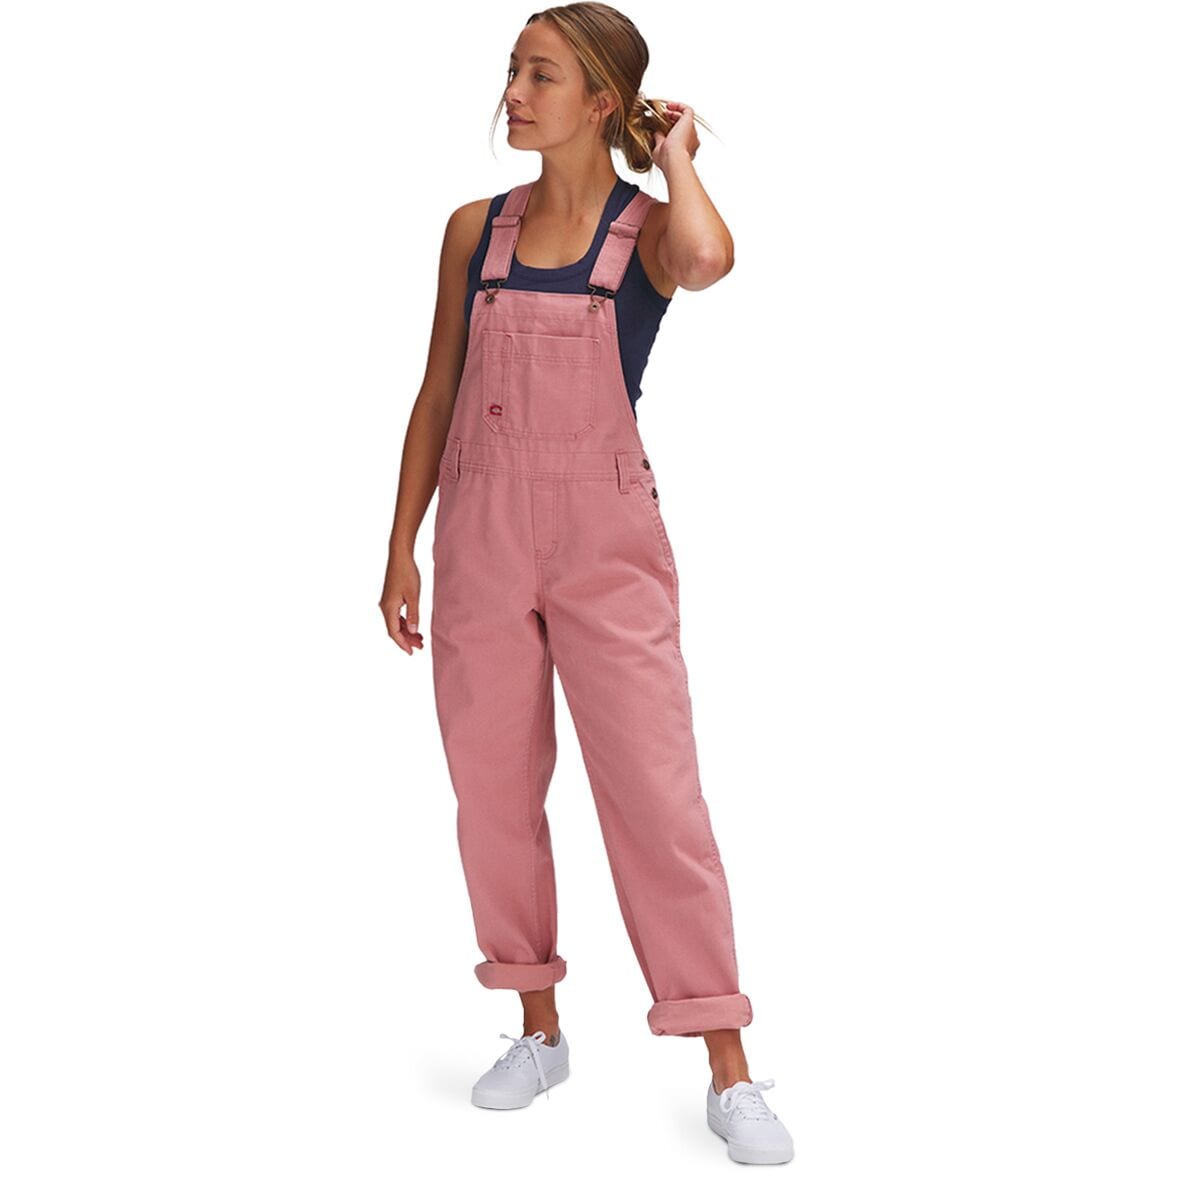 Women's Jumpsuits | Fashion Women's Jumpsuits at Cheap Price | SHEIN Canada